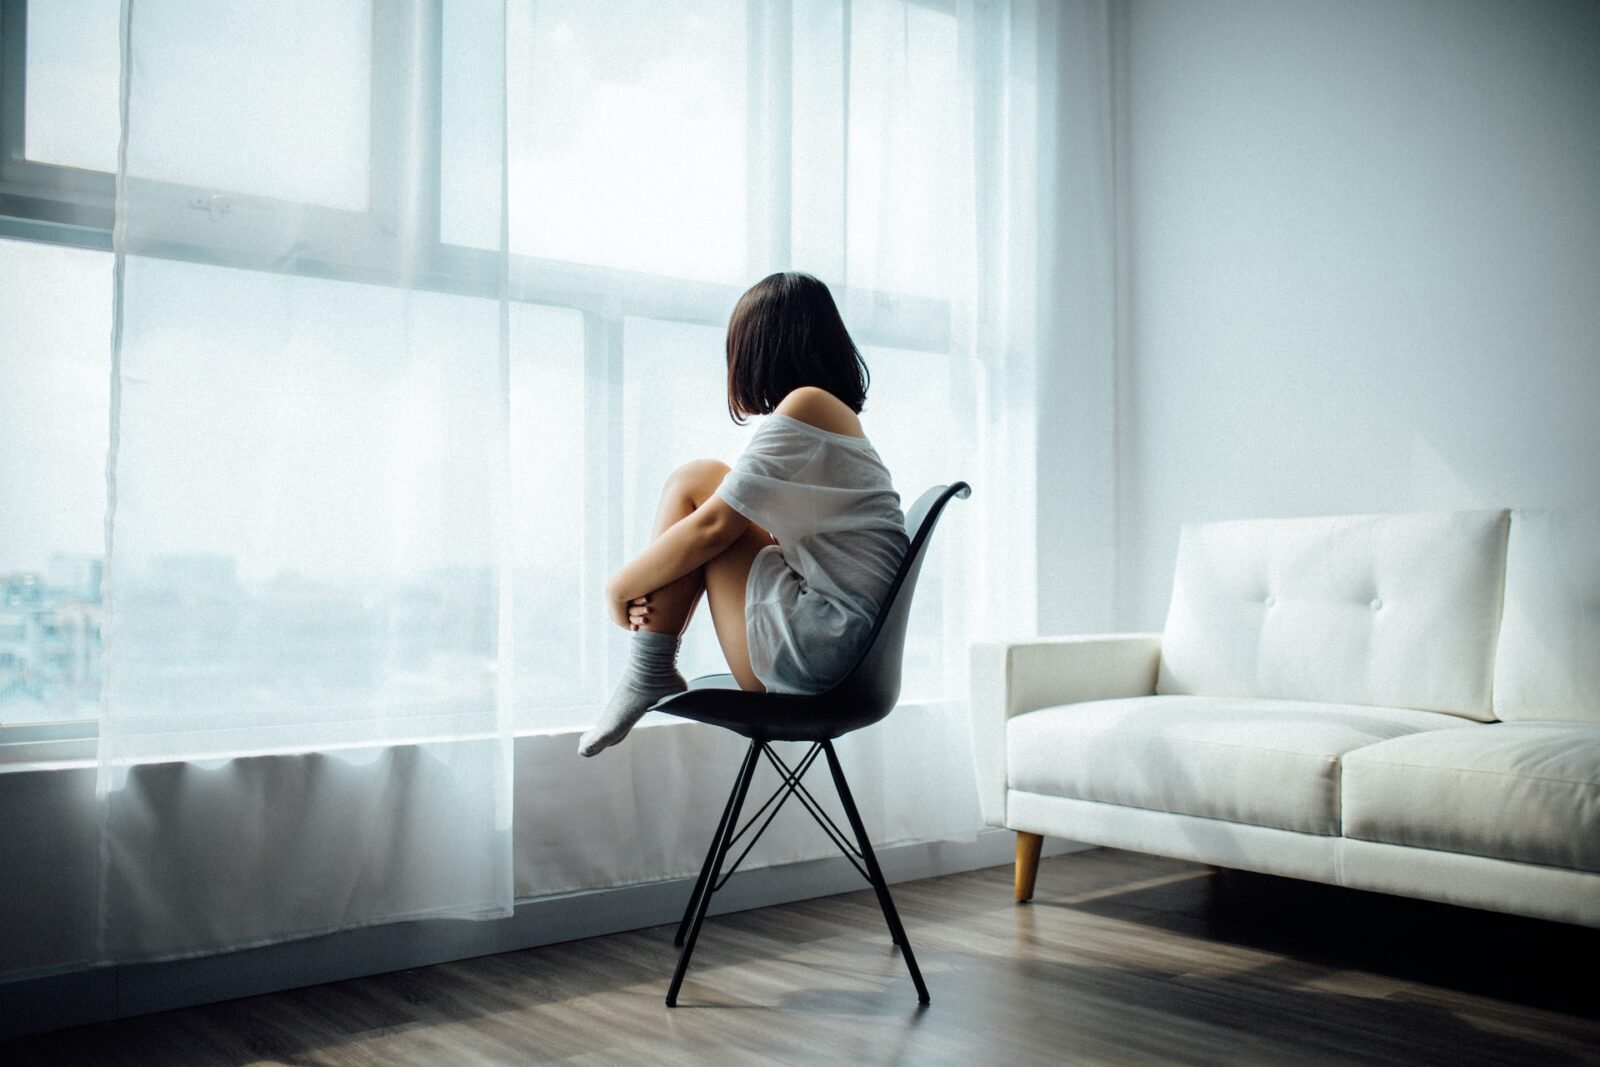 Photo by <a href="https://unsplash.com/@anthonytran?utm_content=creditCopyText&utm_medium=referral&utm_source=unsplash">Anthony Tran</a> on <a href="https://unsplash.com/photos/woman-sitting-on-black-chair-in-front-of-glass-panel-window-with-white-curtains-vXymirxr5ac?utm_content=creditCopyText&utm_medium=referral&utm_source=unsplash">Unsplash</a>
  